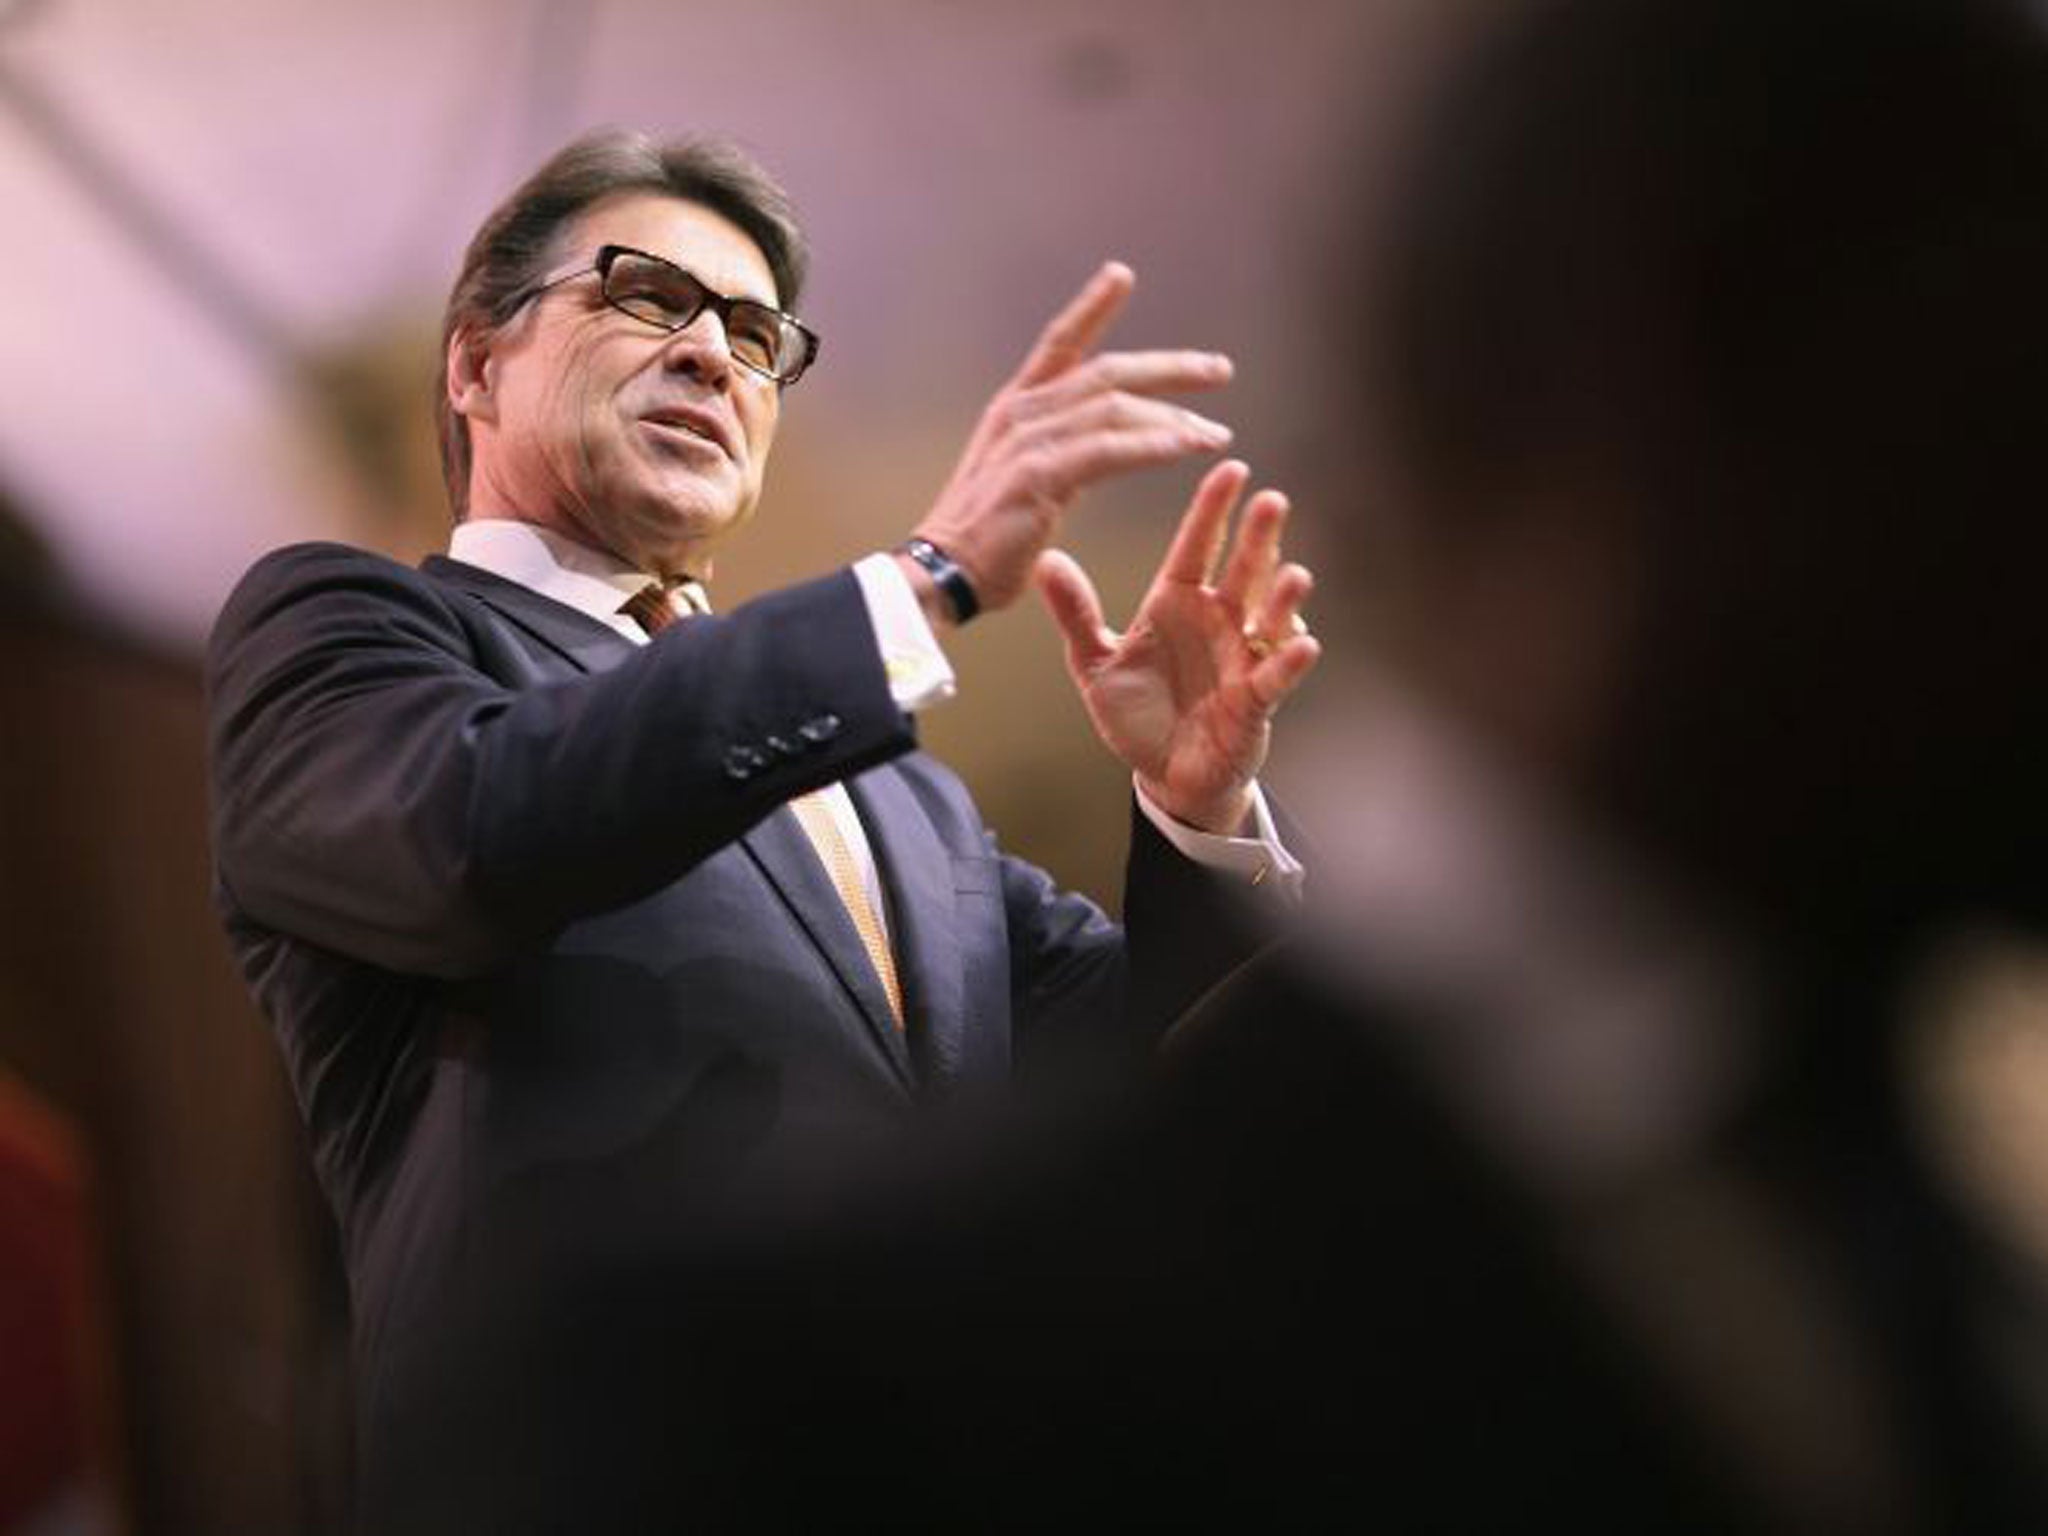 Texas Governor Rick Perry is best remembered for vowing to eliminate three cabinet departments during a candidates' debate, and then not remembering which they were